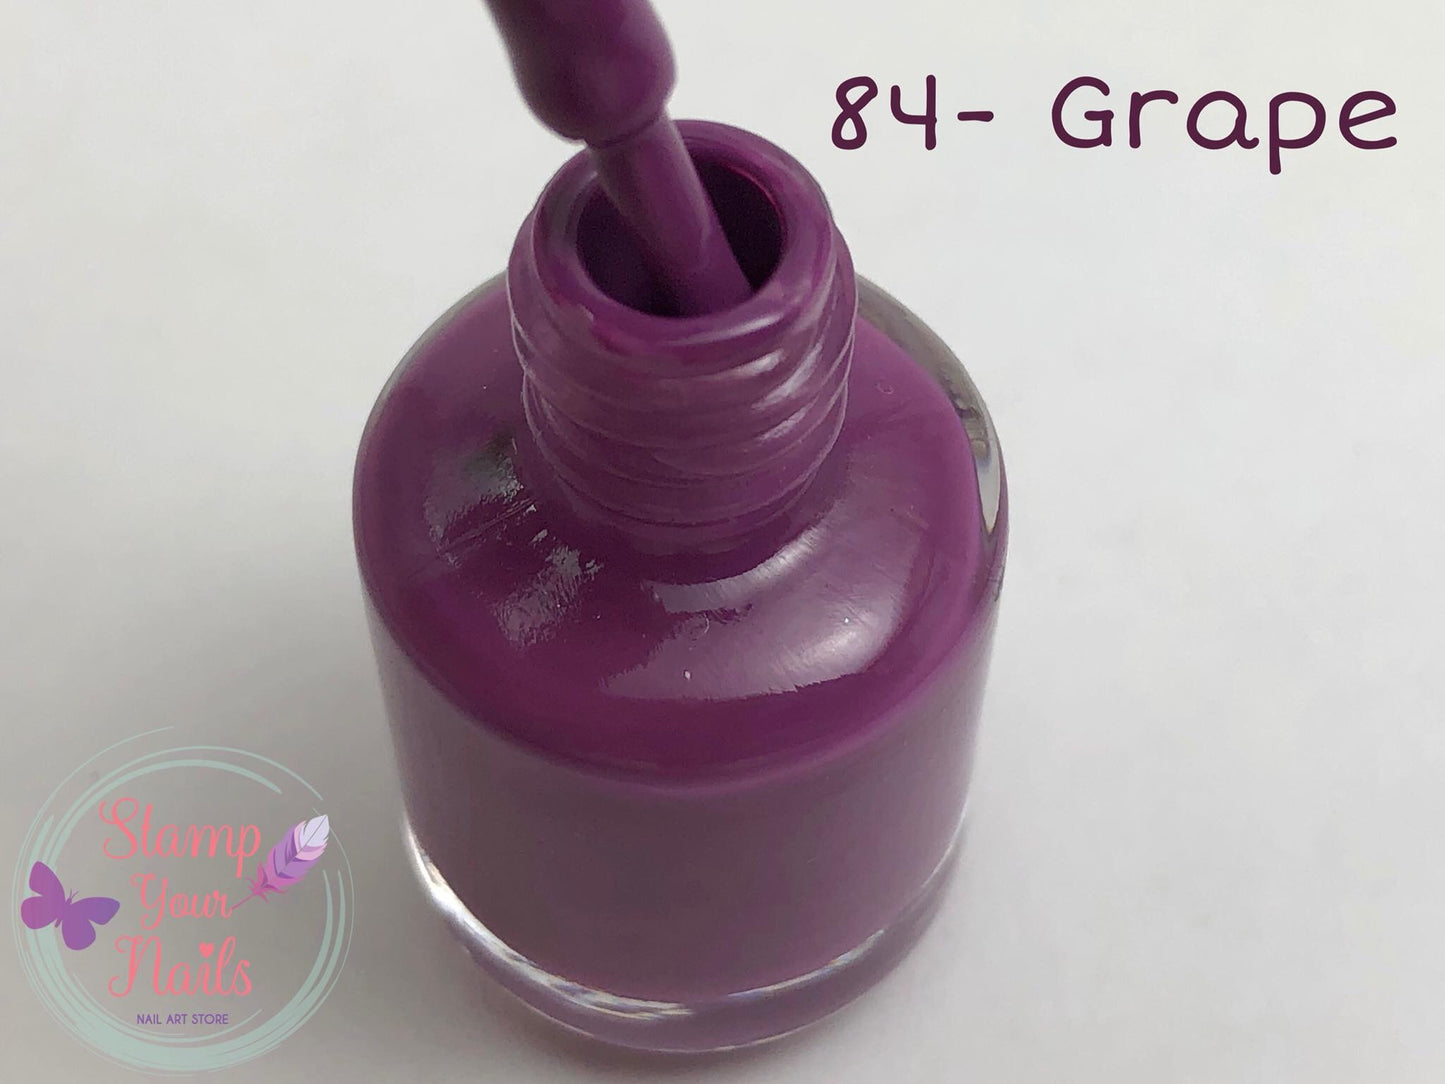 84 Grape - Stamp your nails